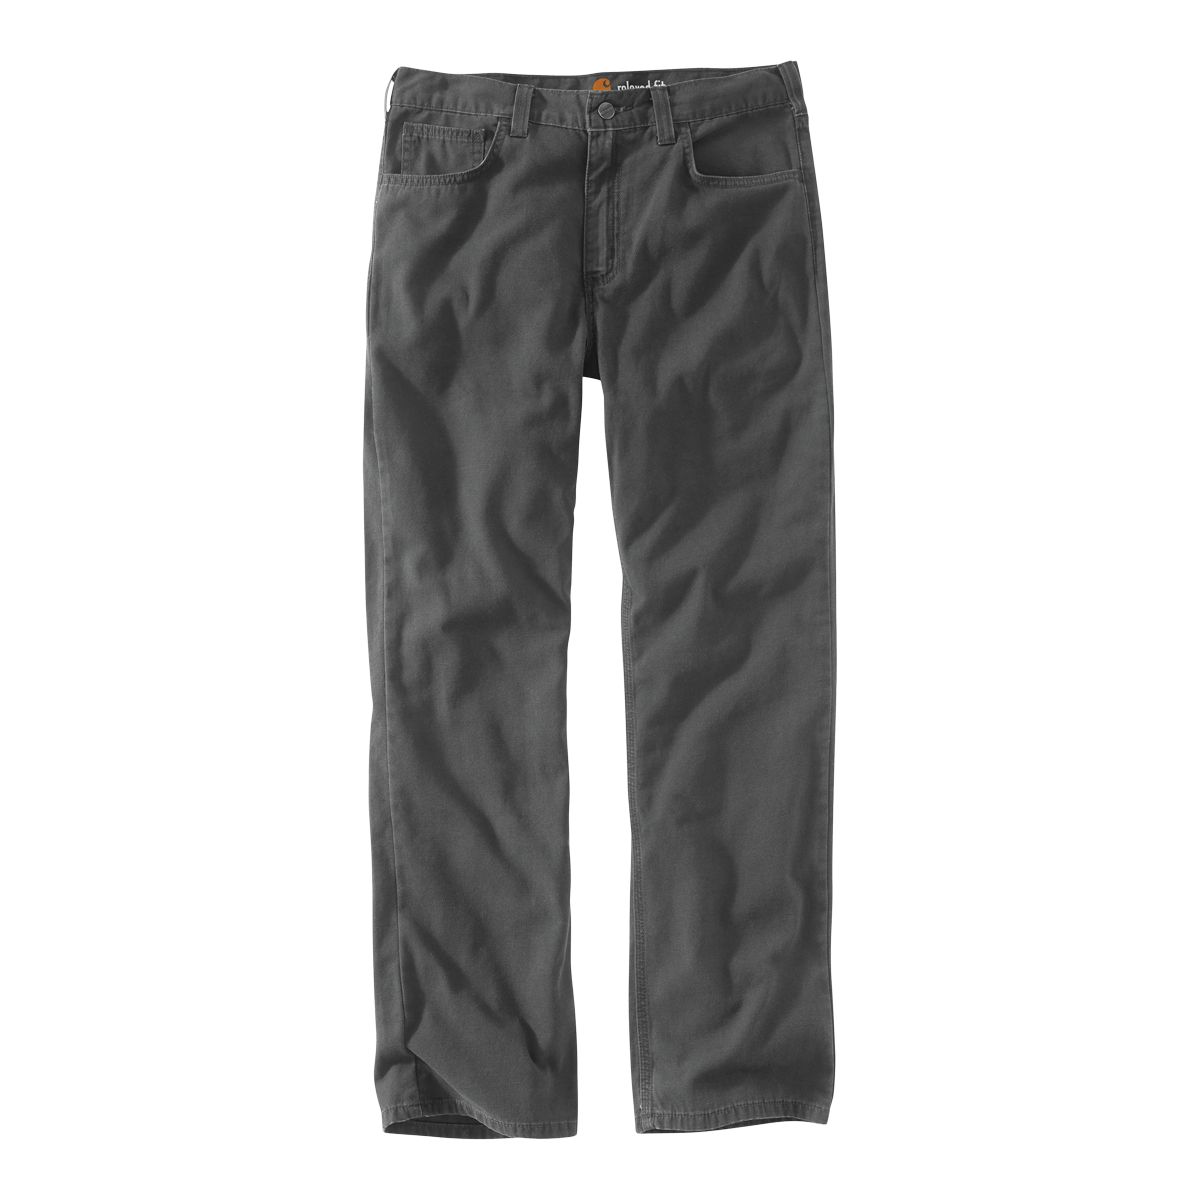 Image of Carhartt Men's Rugged Flex Rigby Relaxed Fit 5 Pocket Work Pants -